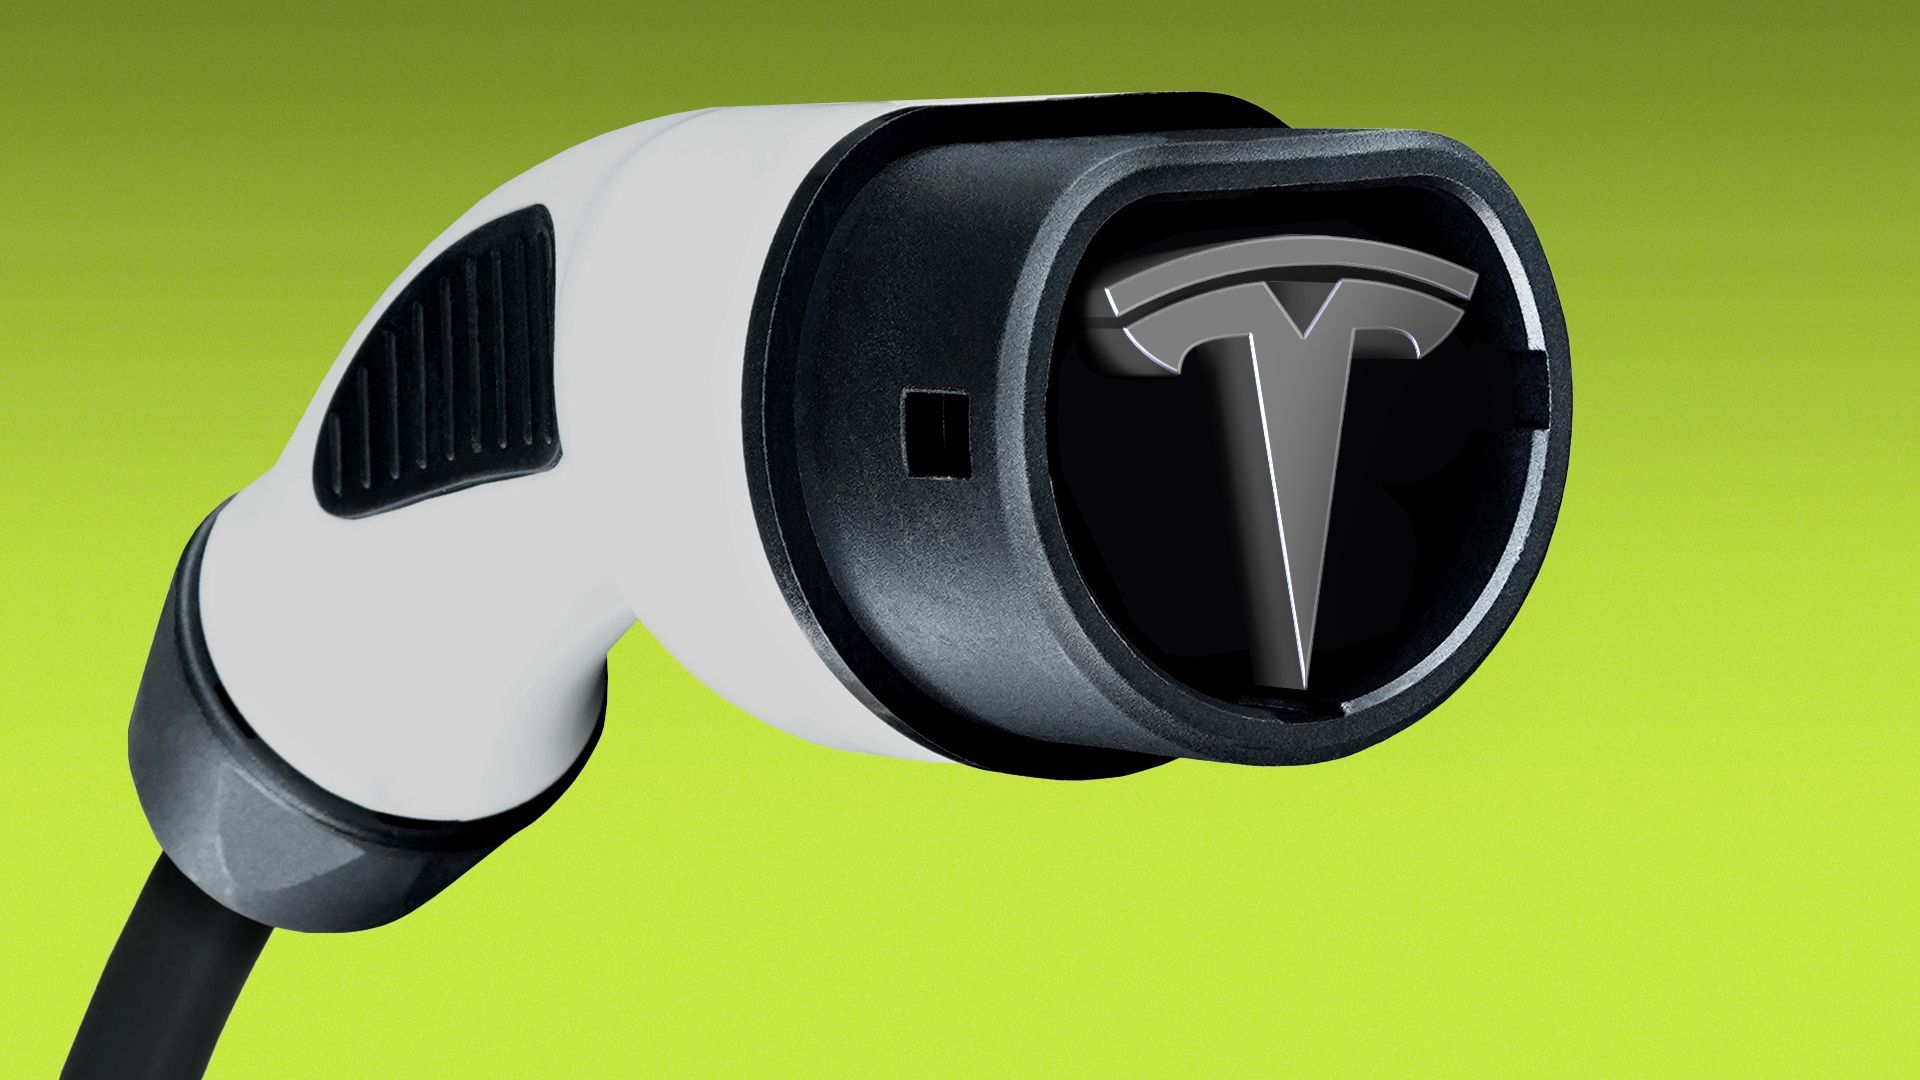 Illustration of an EV charger with a Tesla logo built into it.